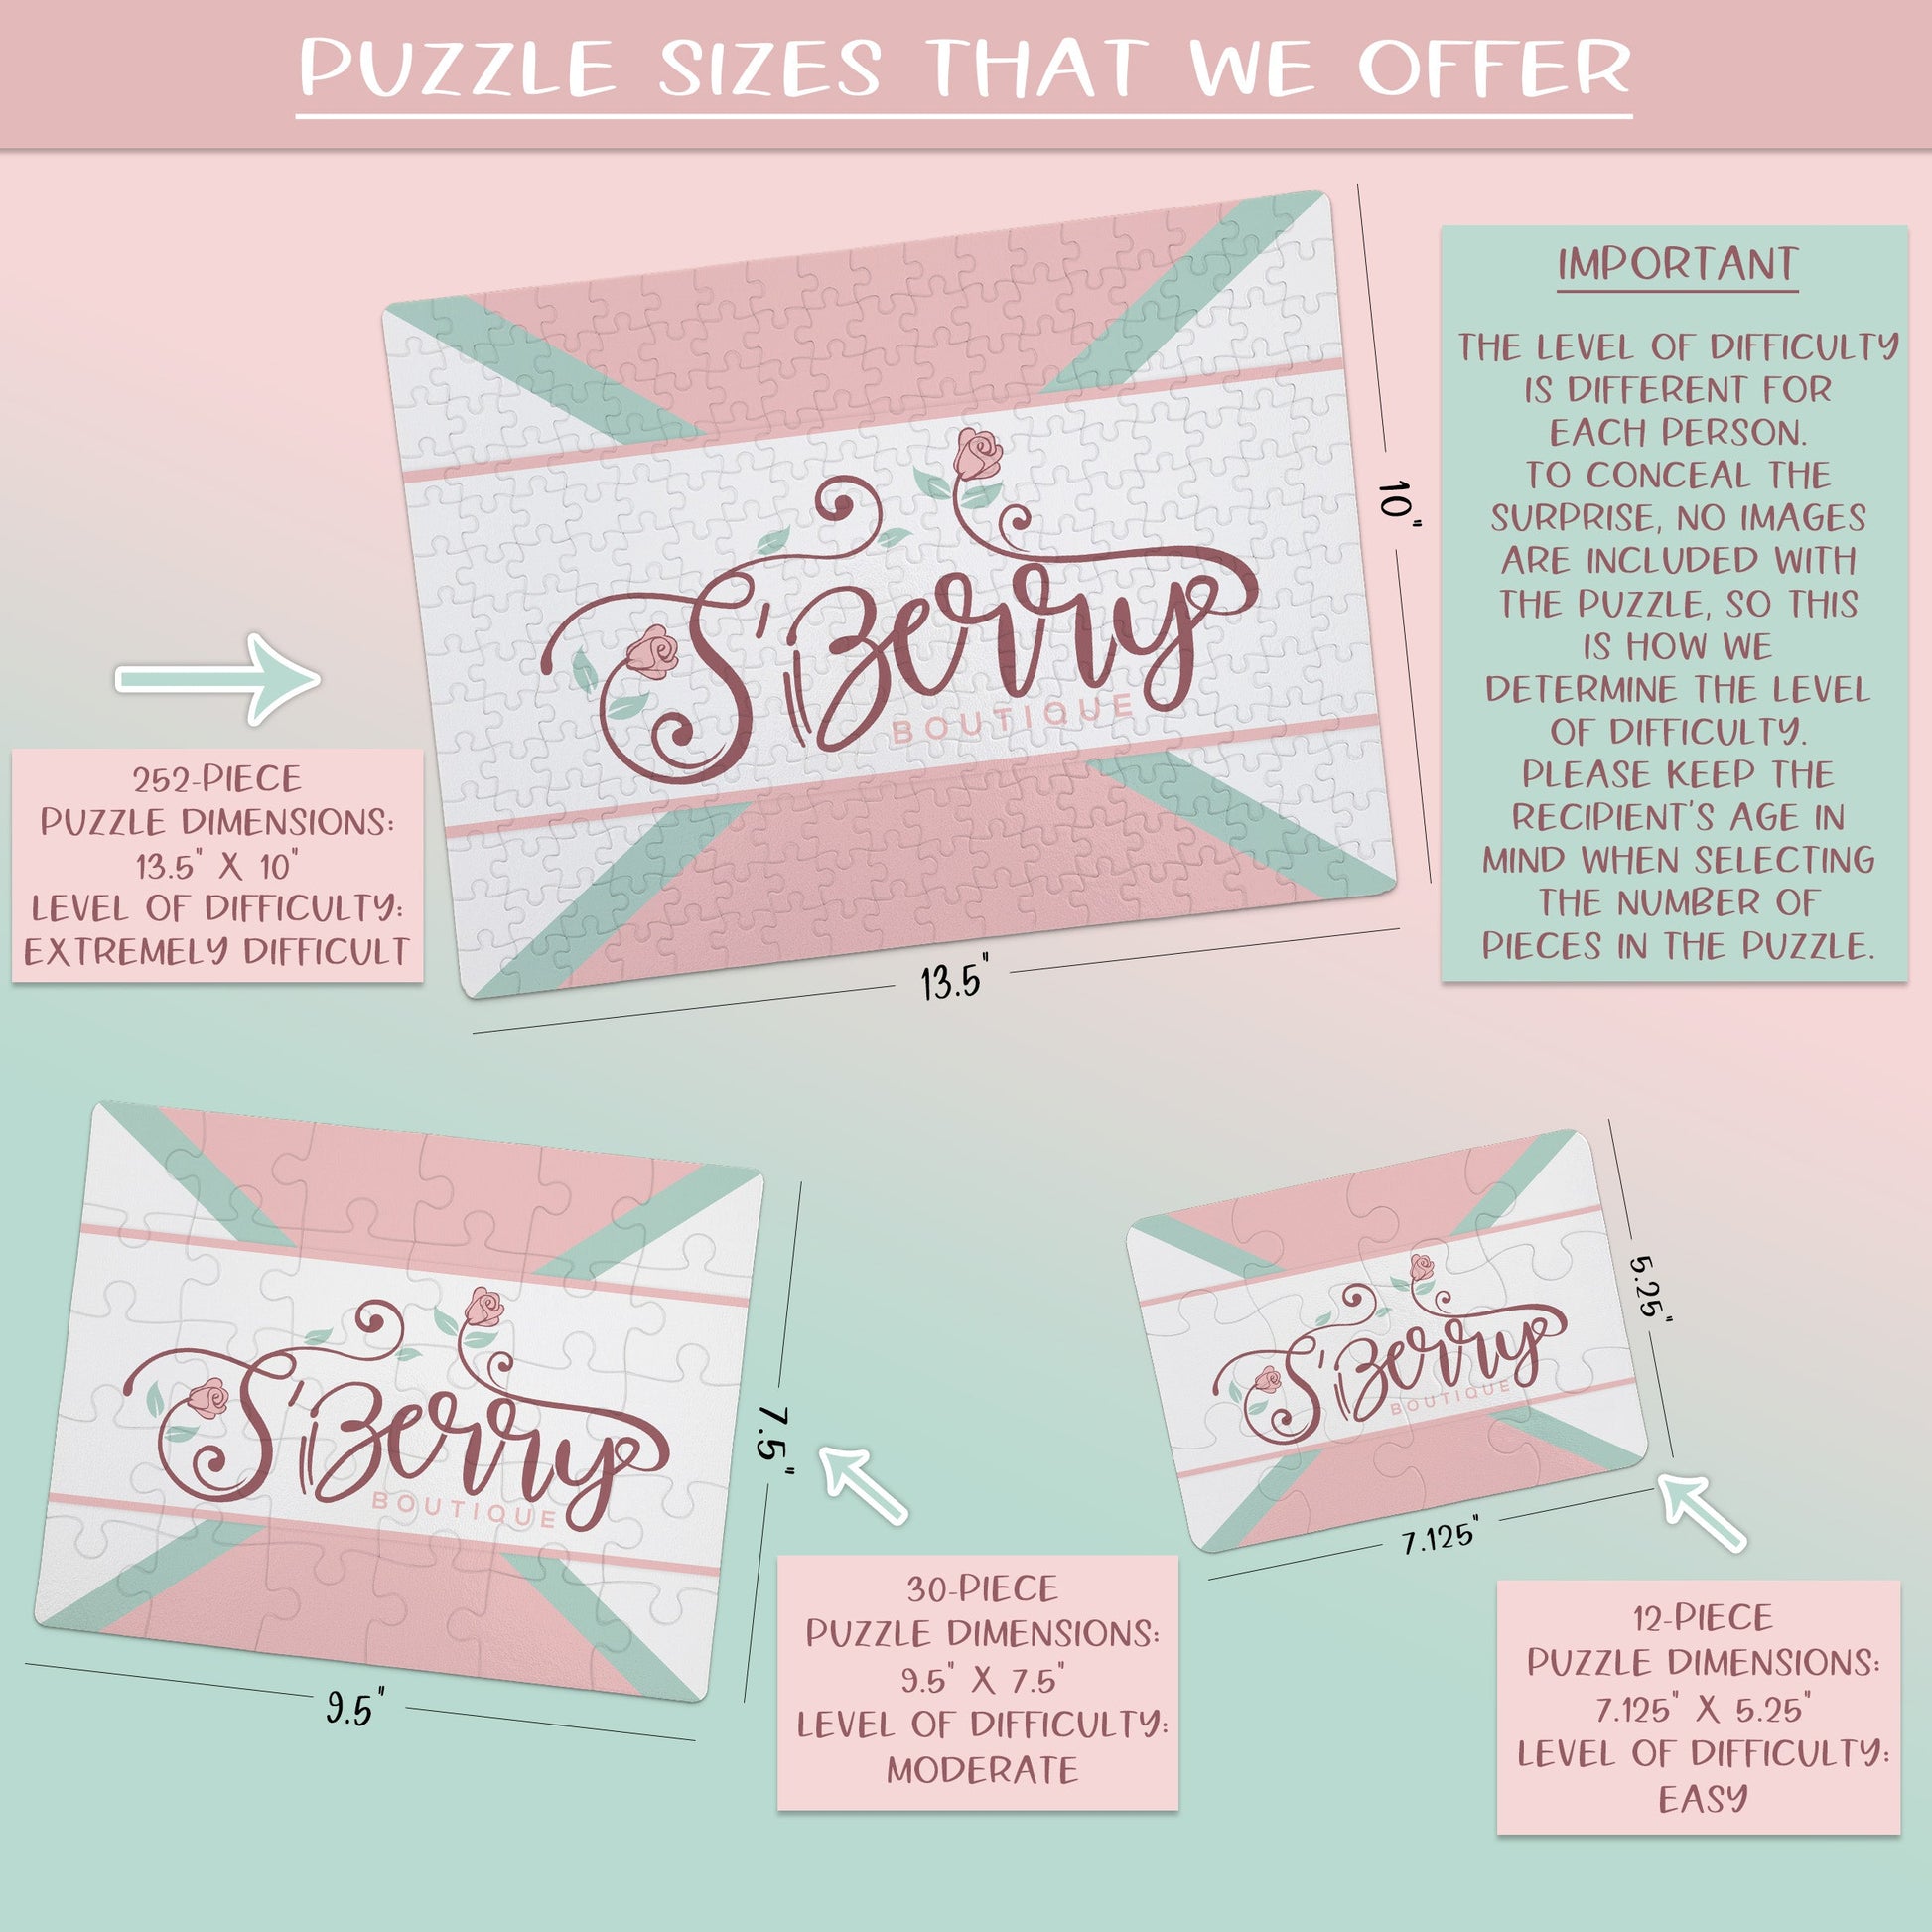 Create Your Own Puzzle - Arrow Design - CYOP0234 | S'Berry Boutique